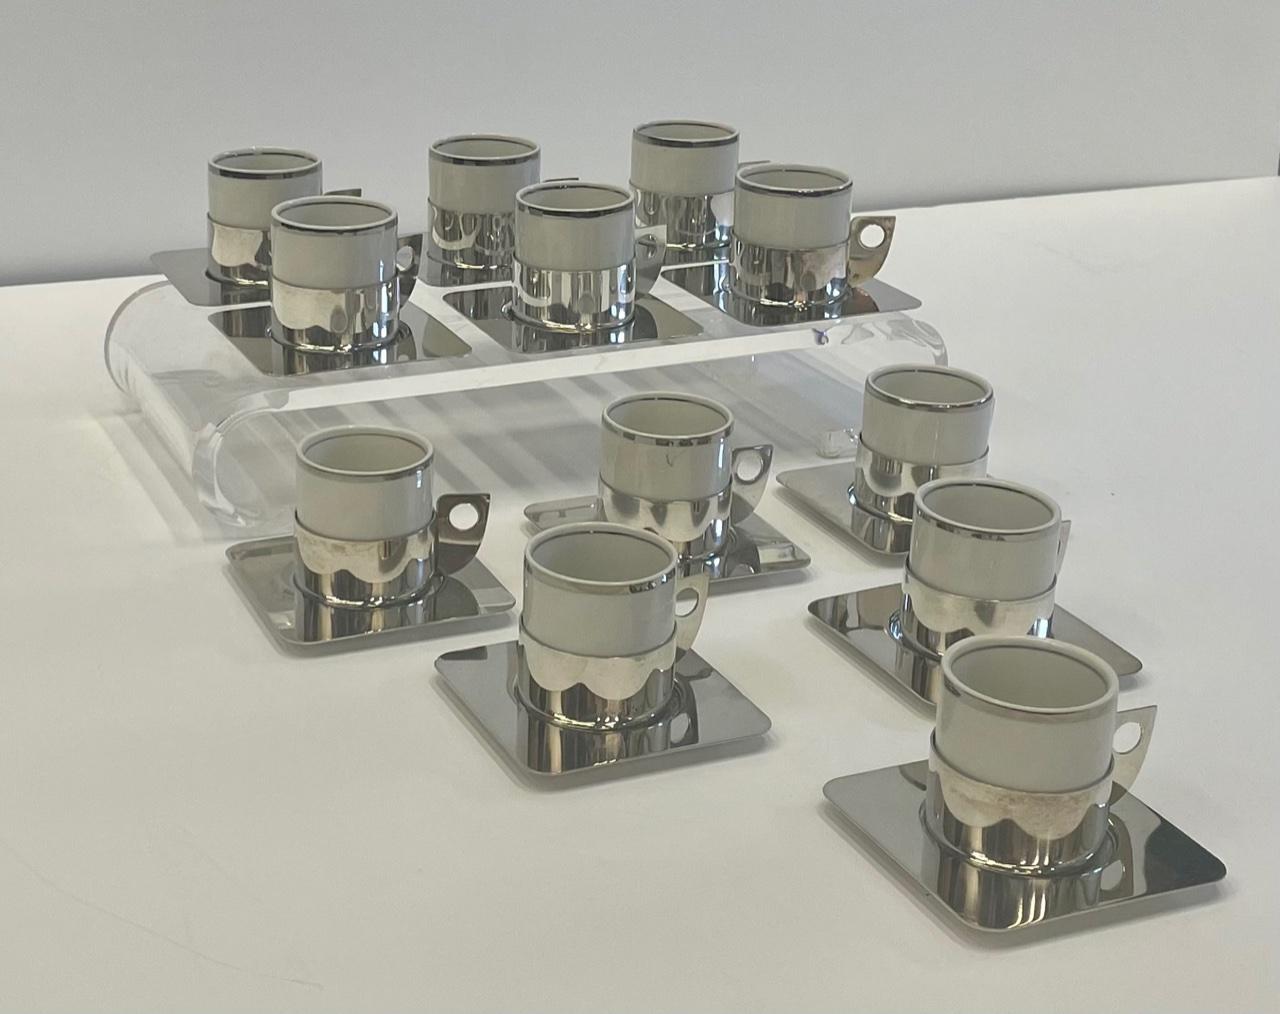 Stylish set of 12 demitasse cups and saucers having a mix of silver plate and white porcelain. Cups are 2